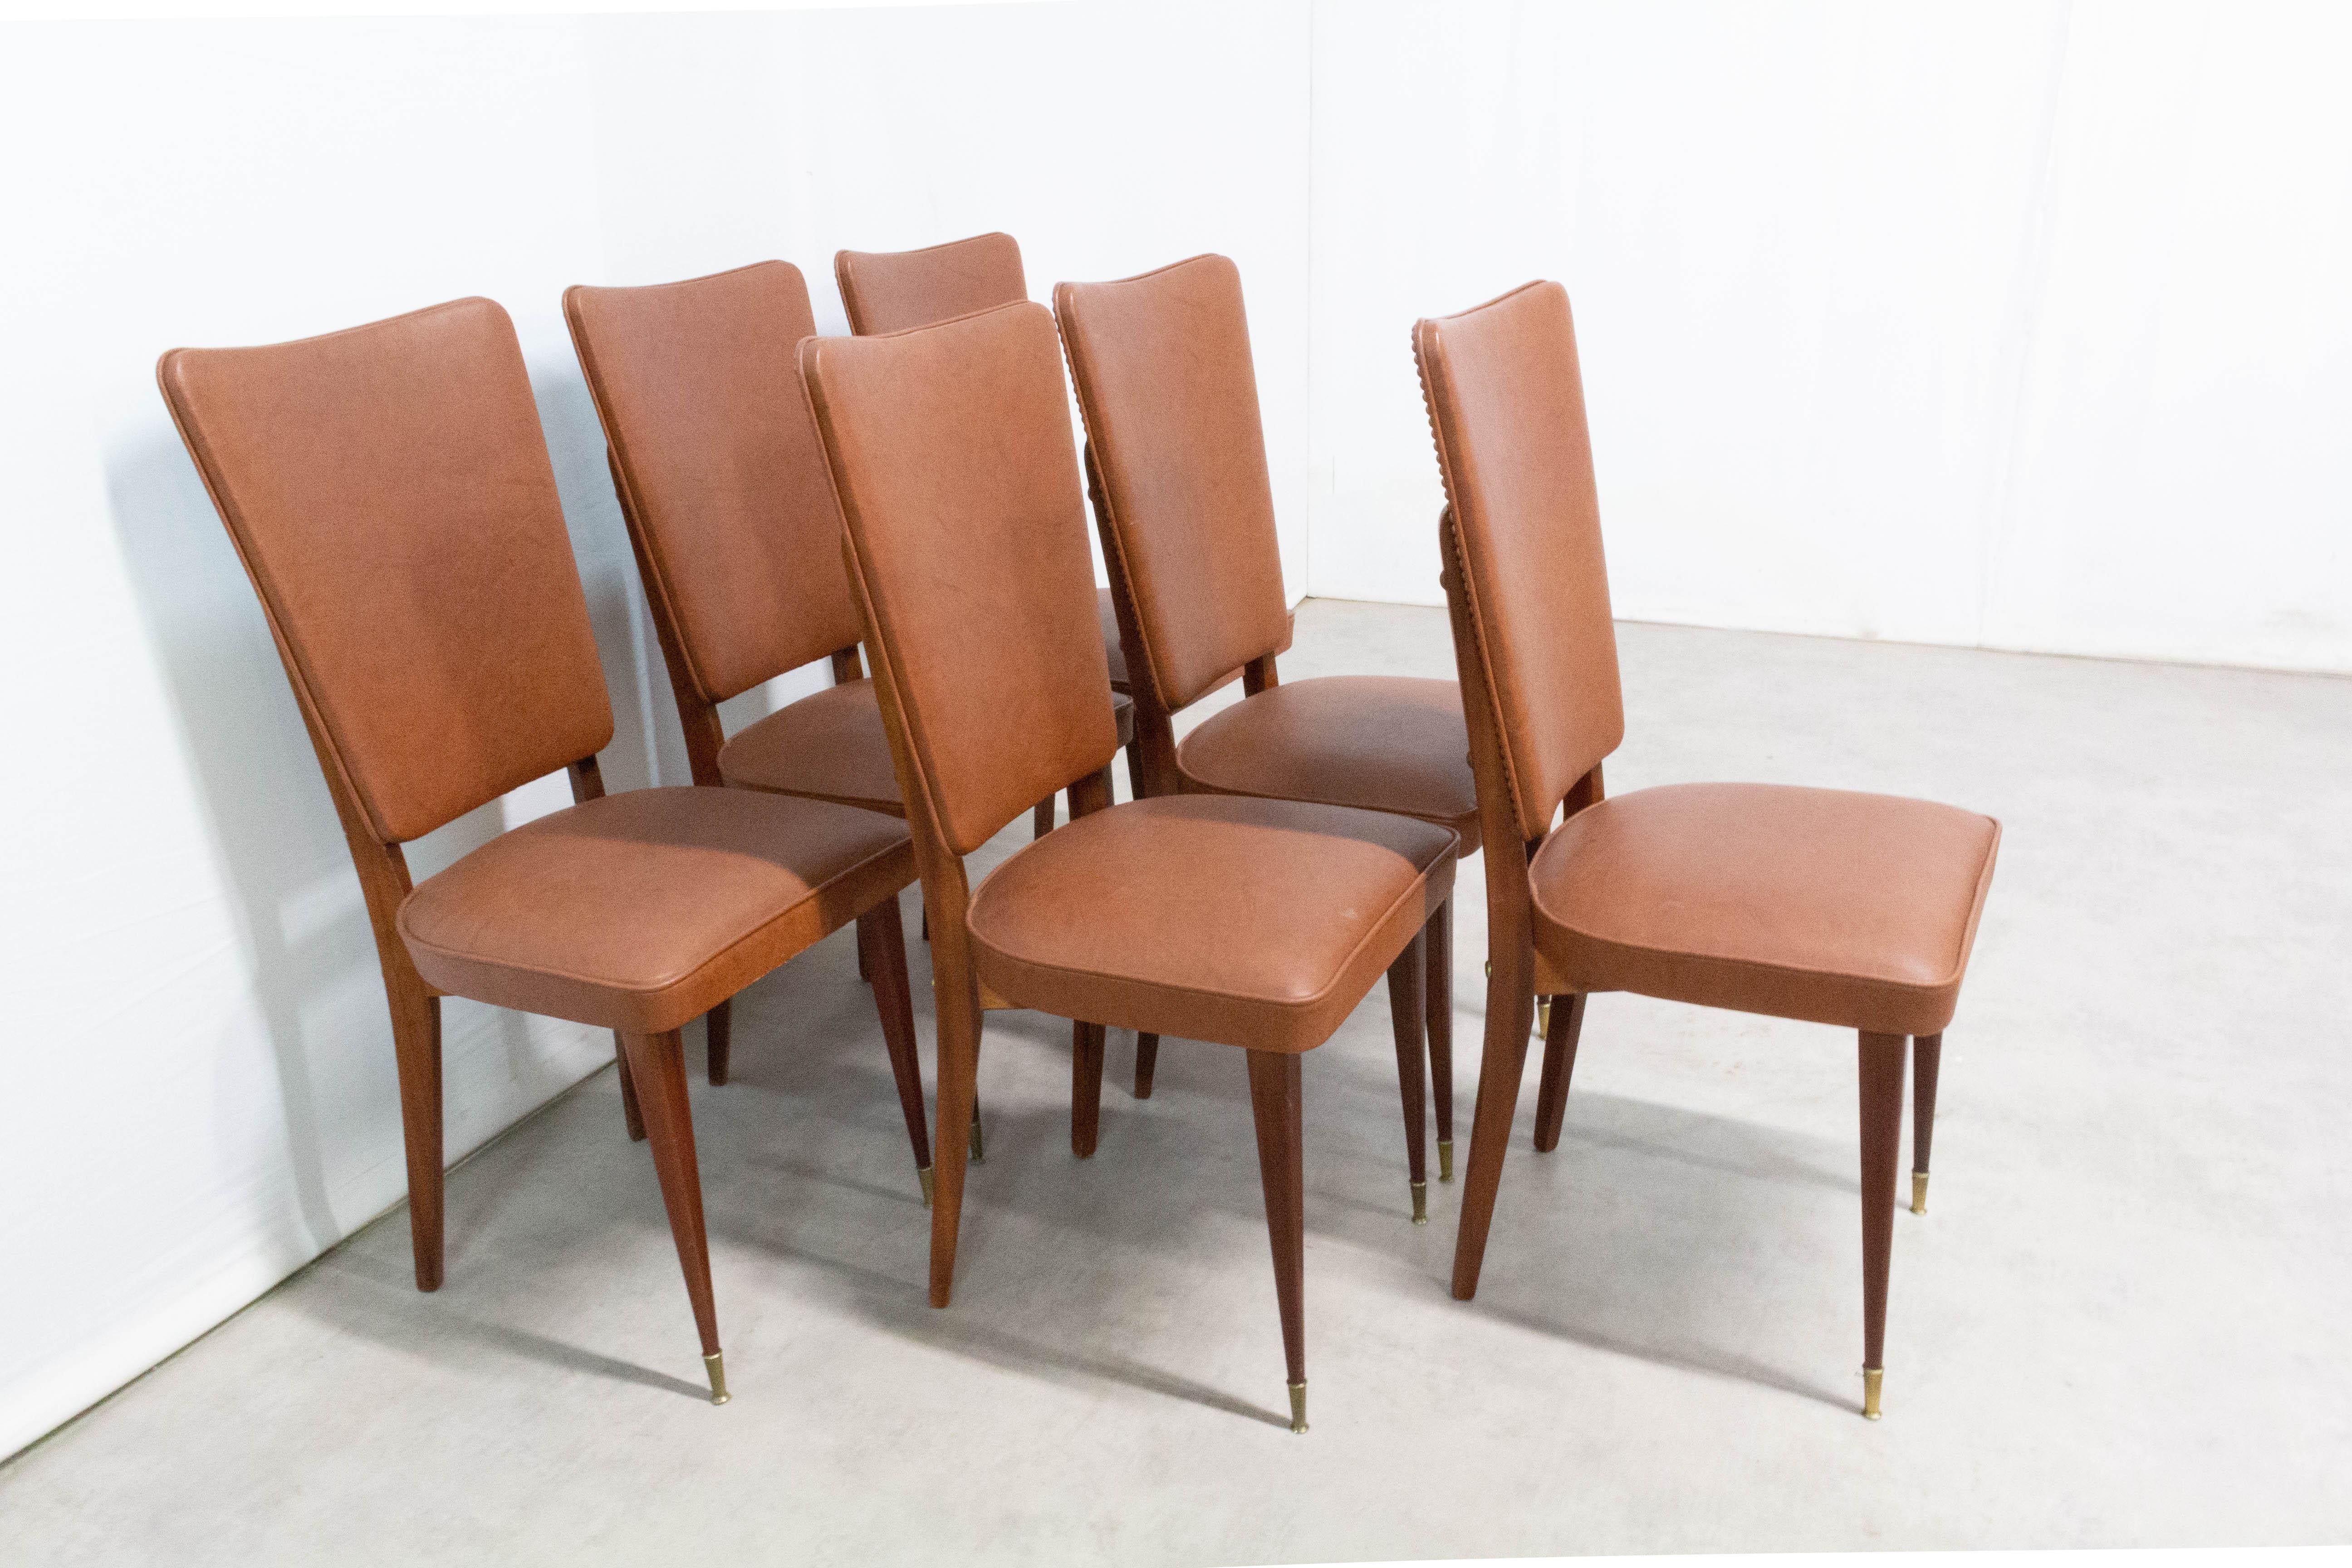 Six Midcentury Dining Chairs Brown Skai and Iroko Wood French, circa 1960 For Sale 9